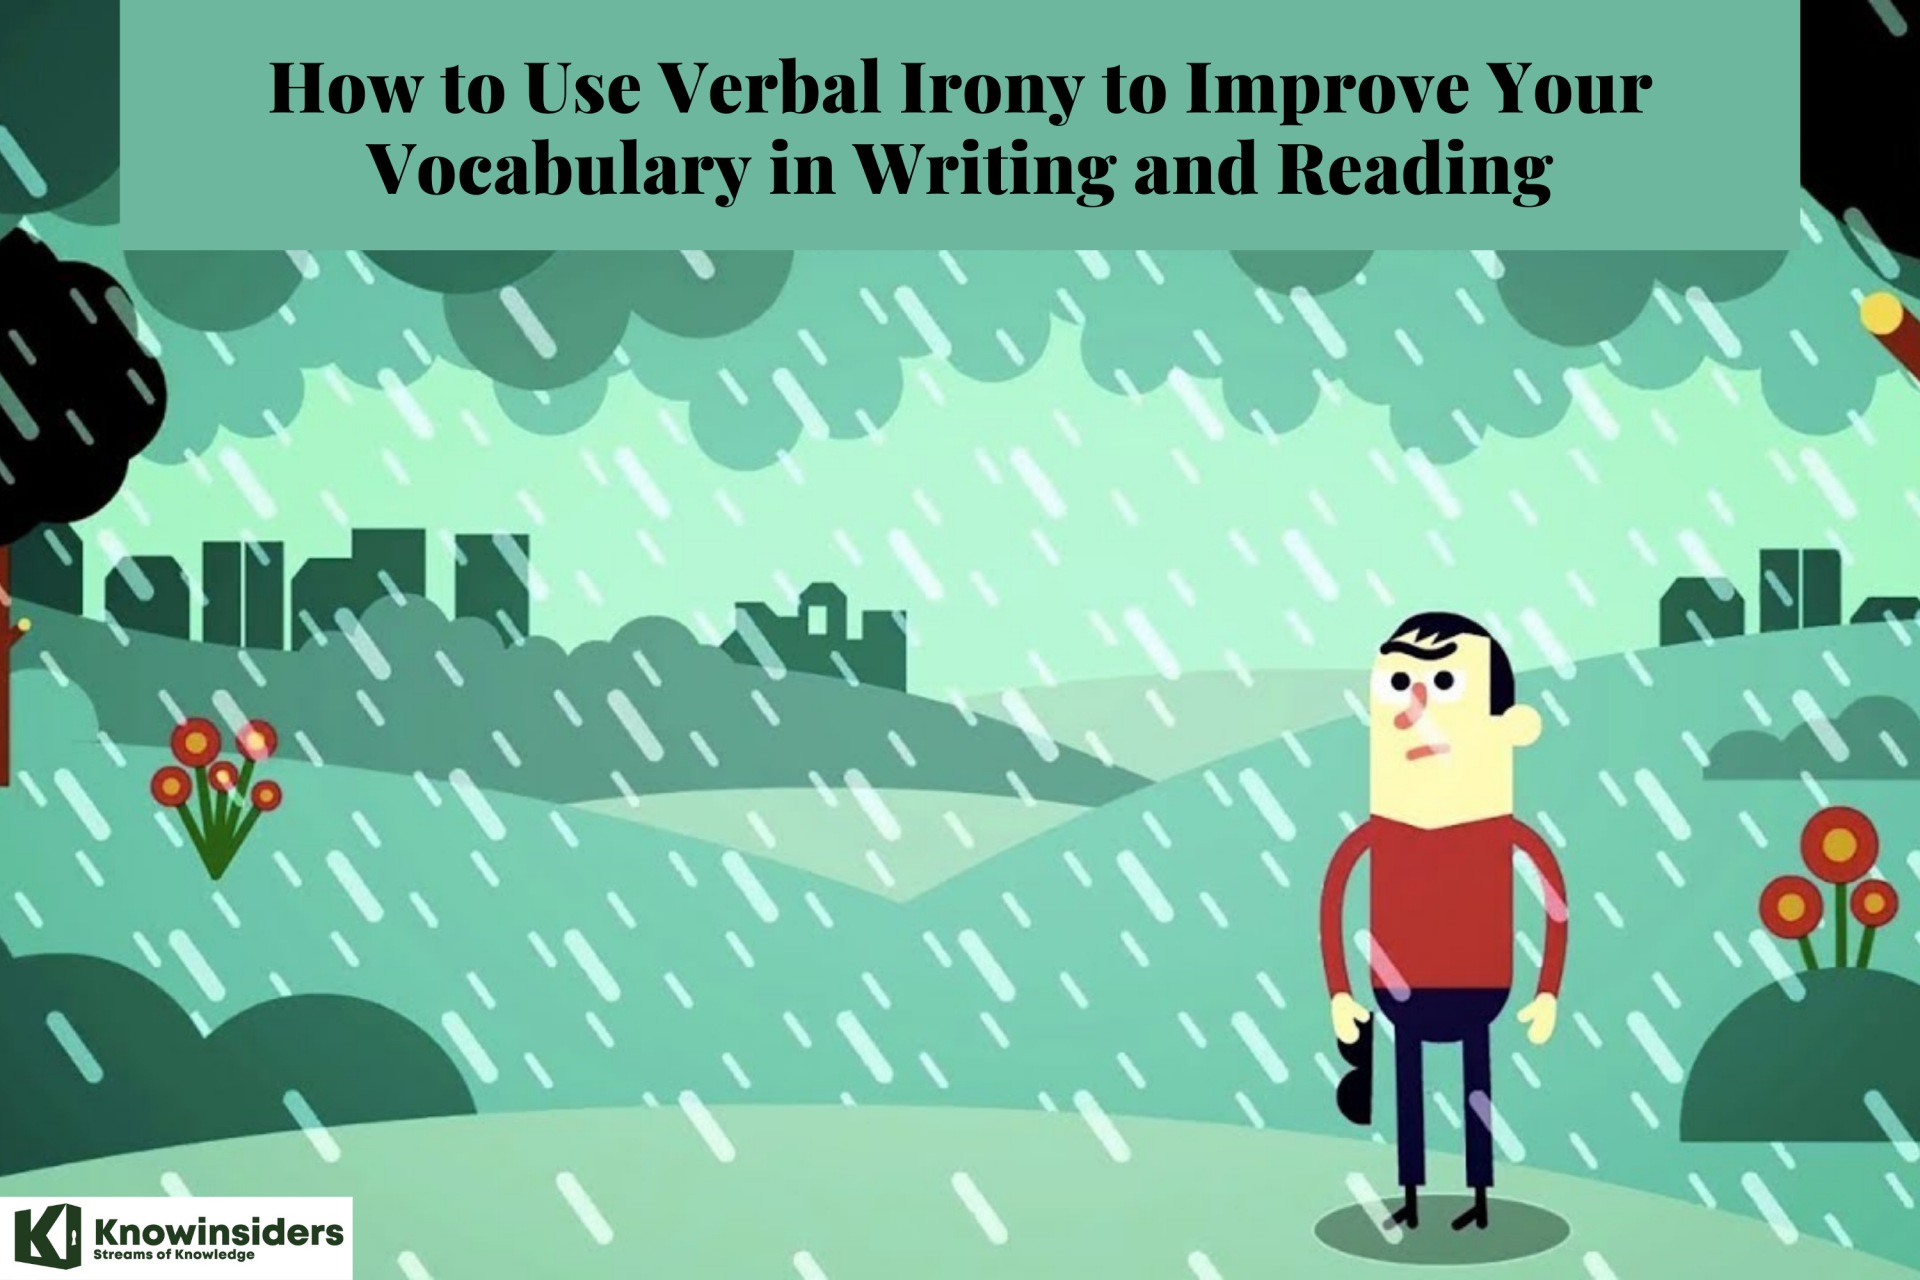 How to Use Verbal Irony to Improve Your Vocabulary in Writing and Reading